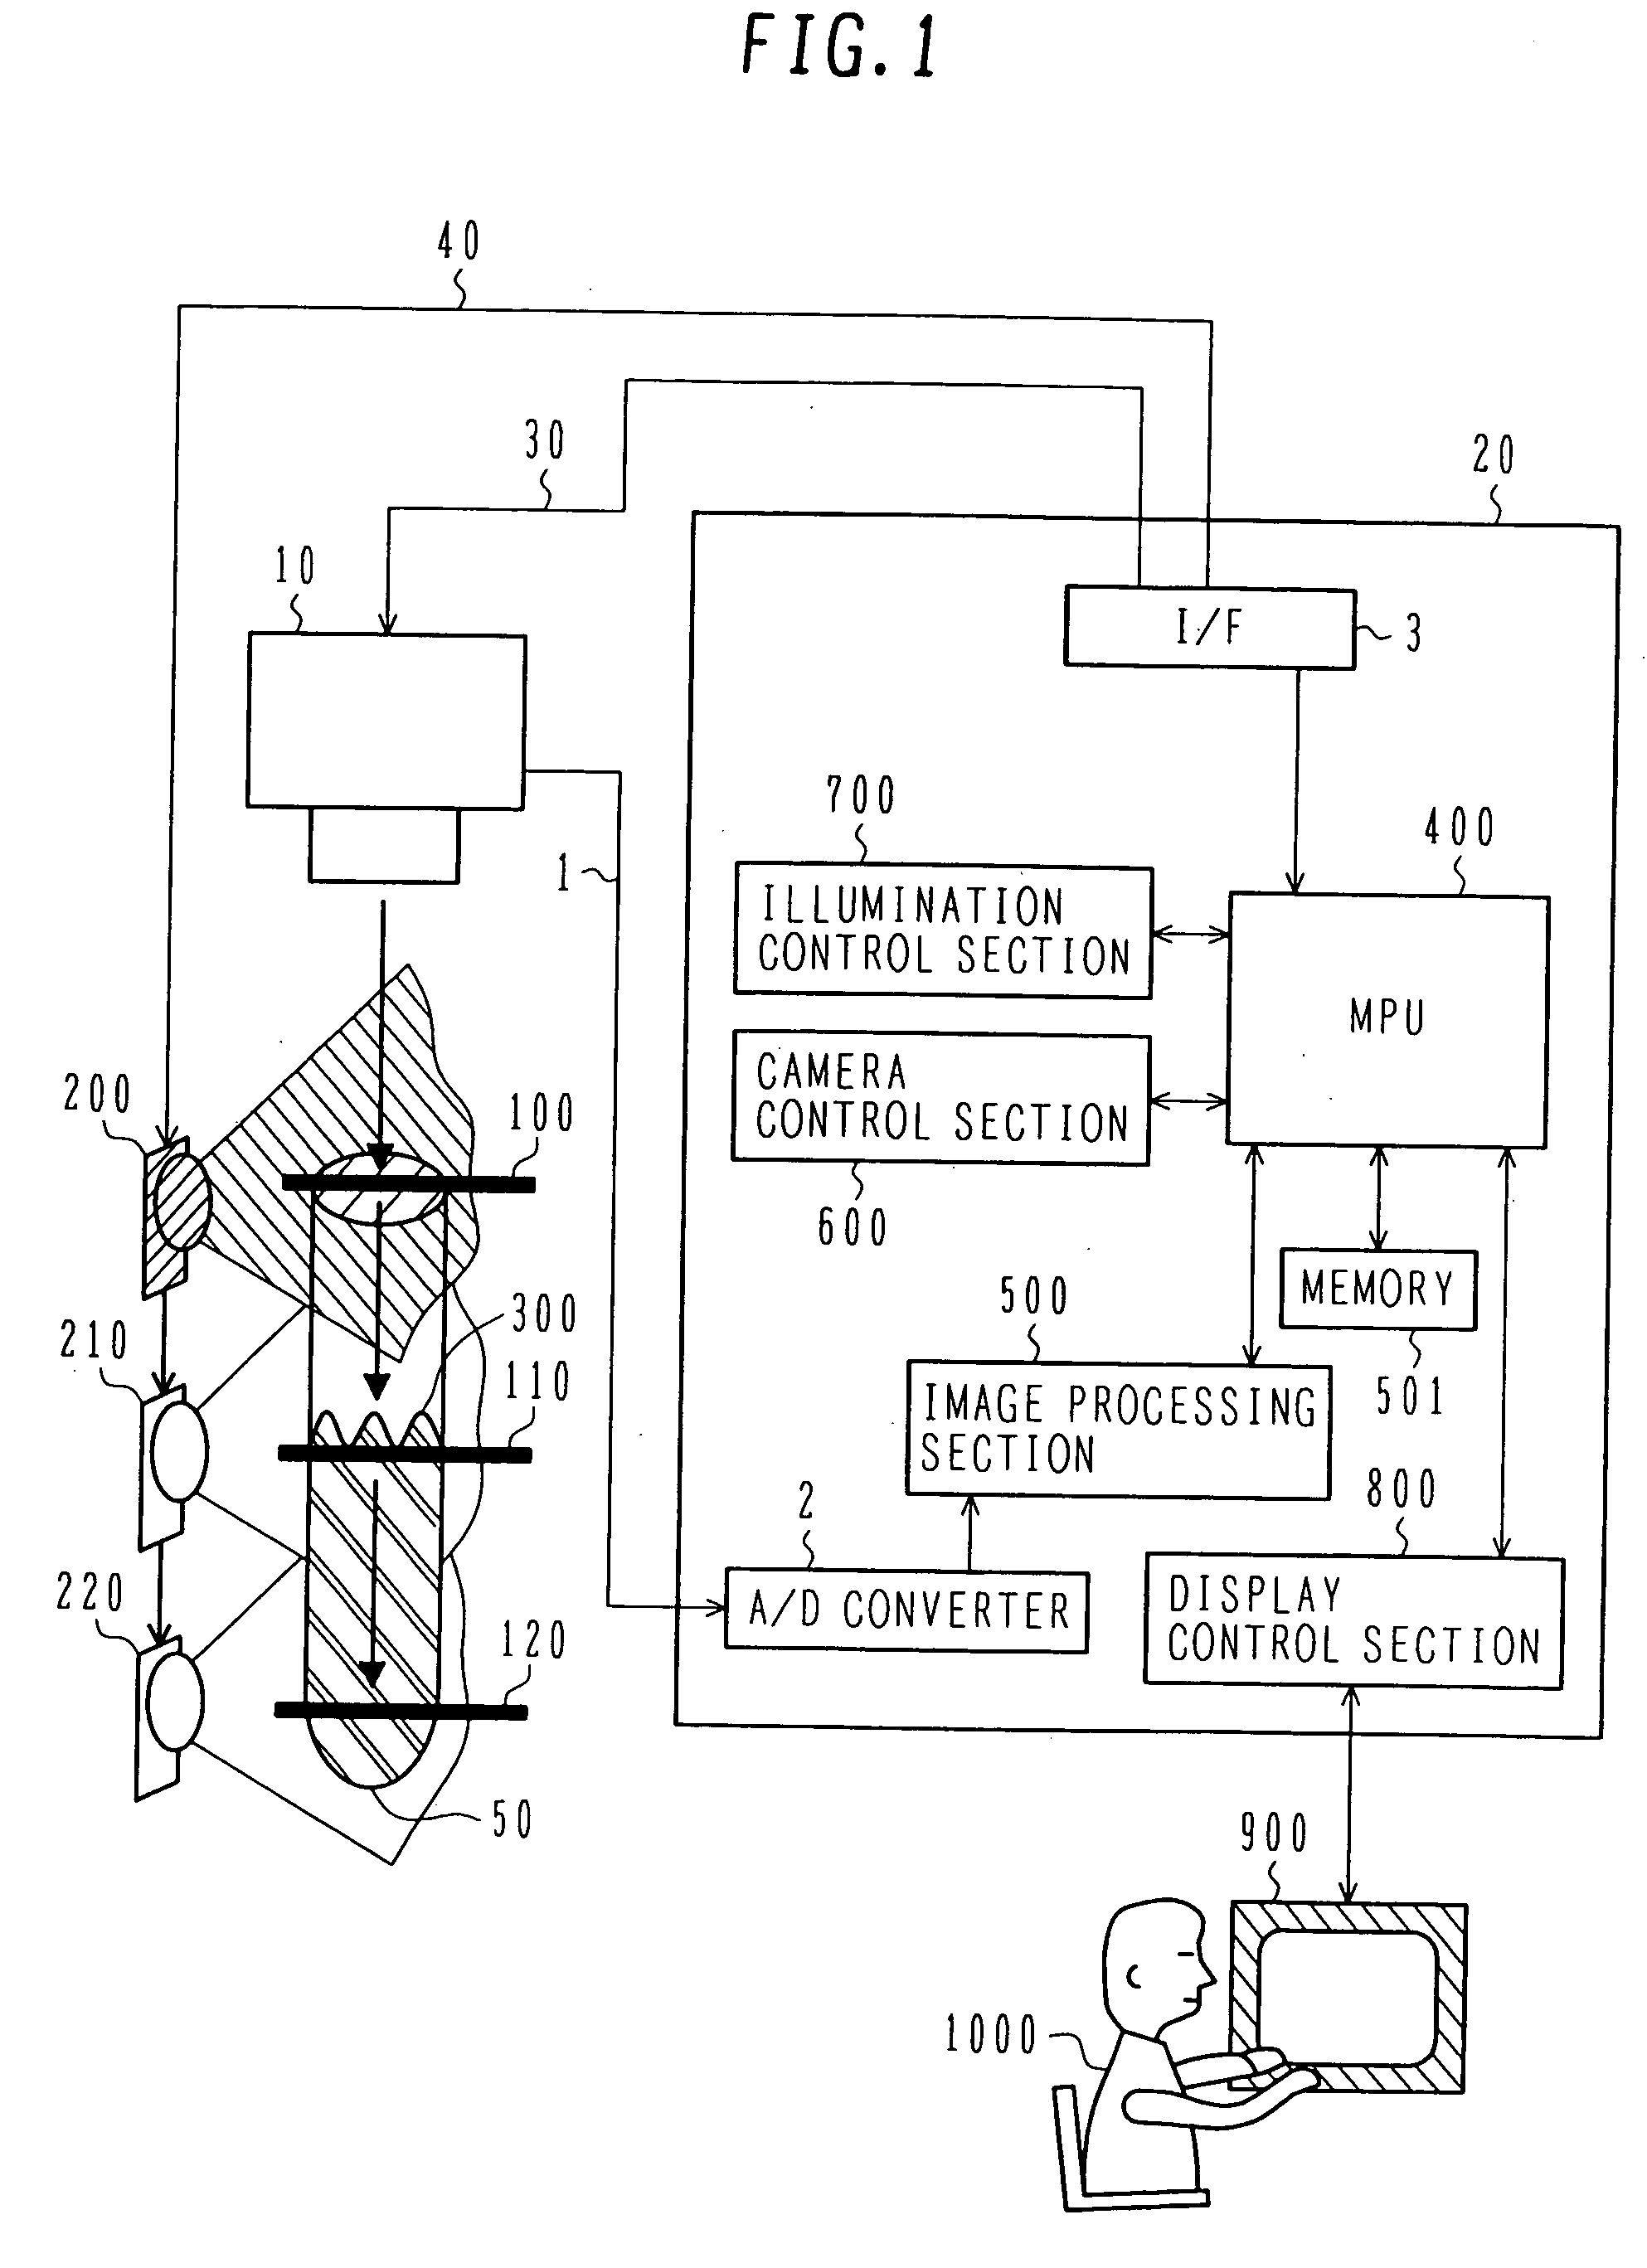 Foreign matter detecting system